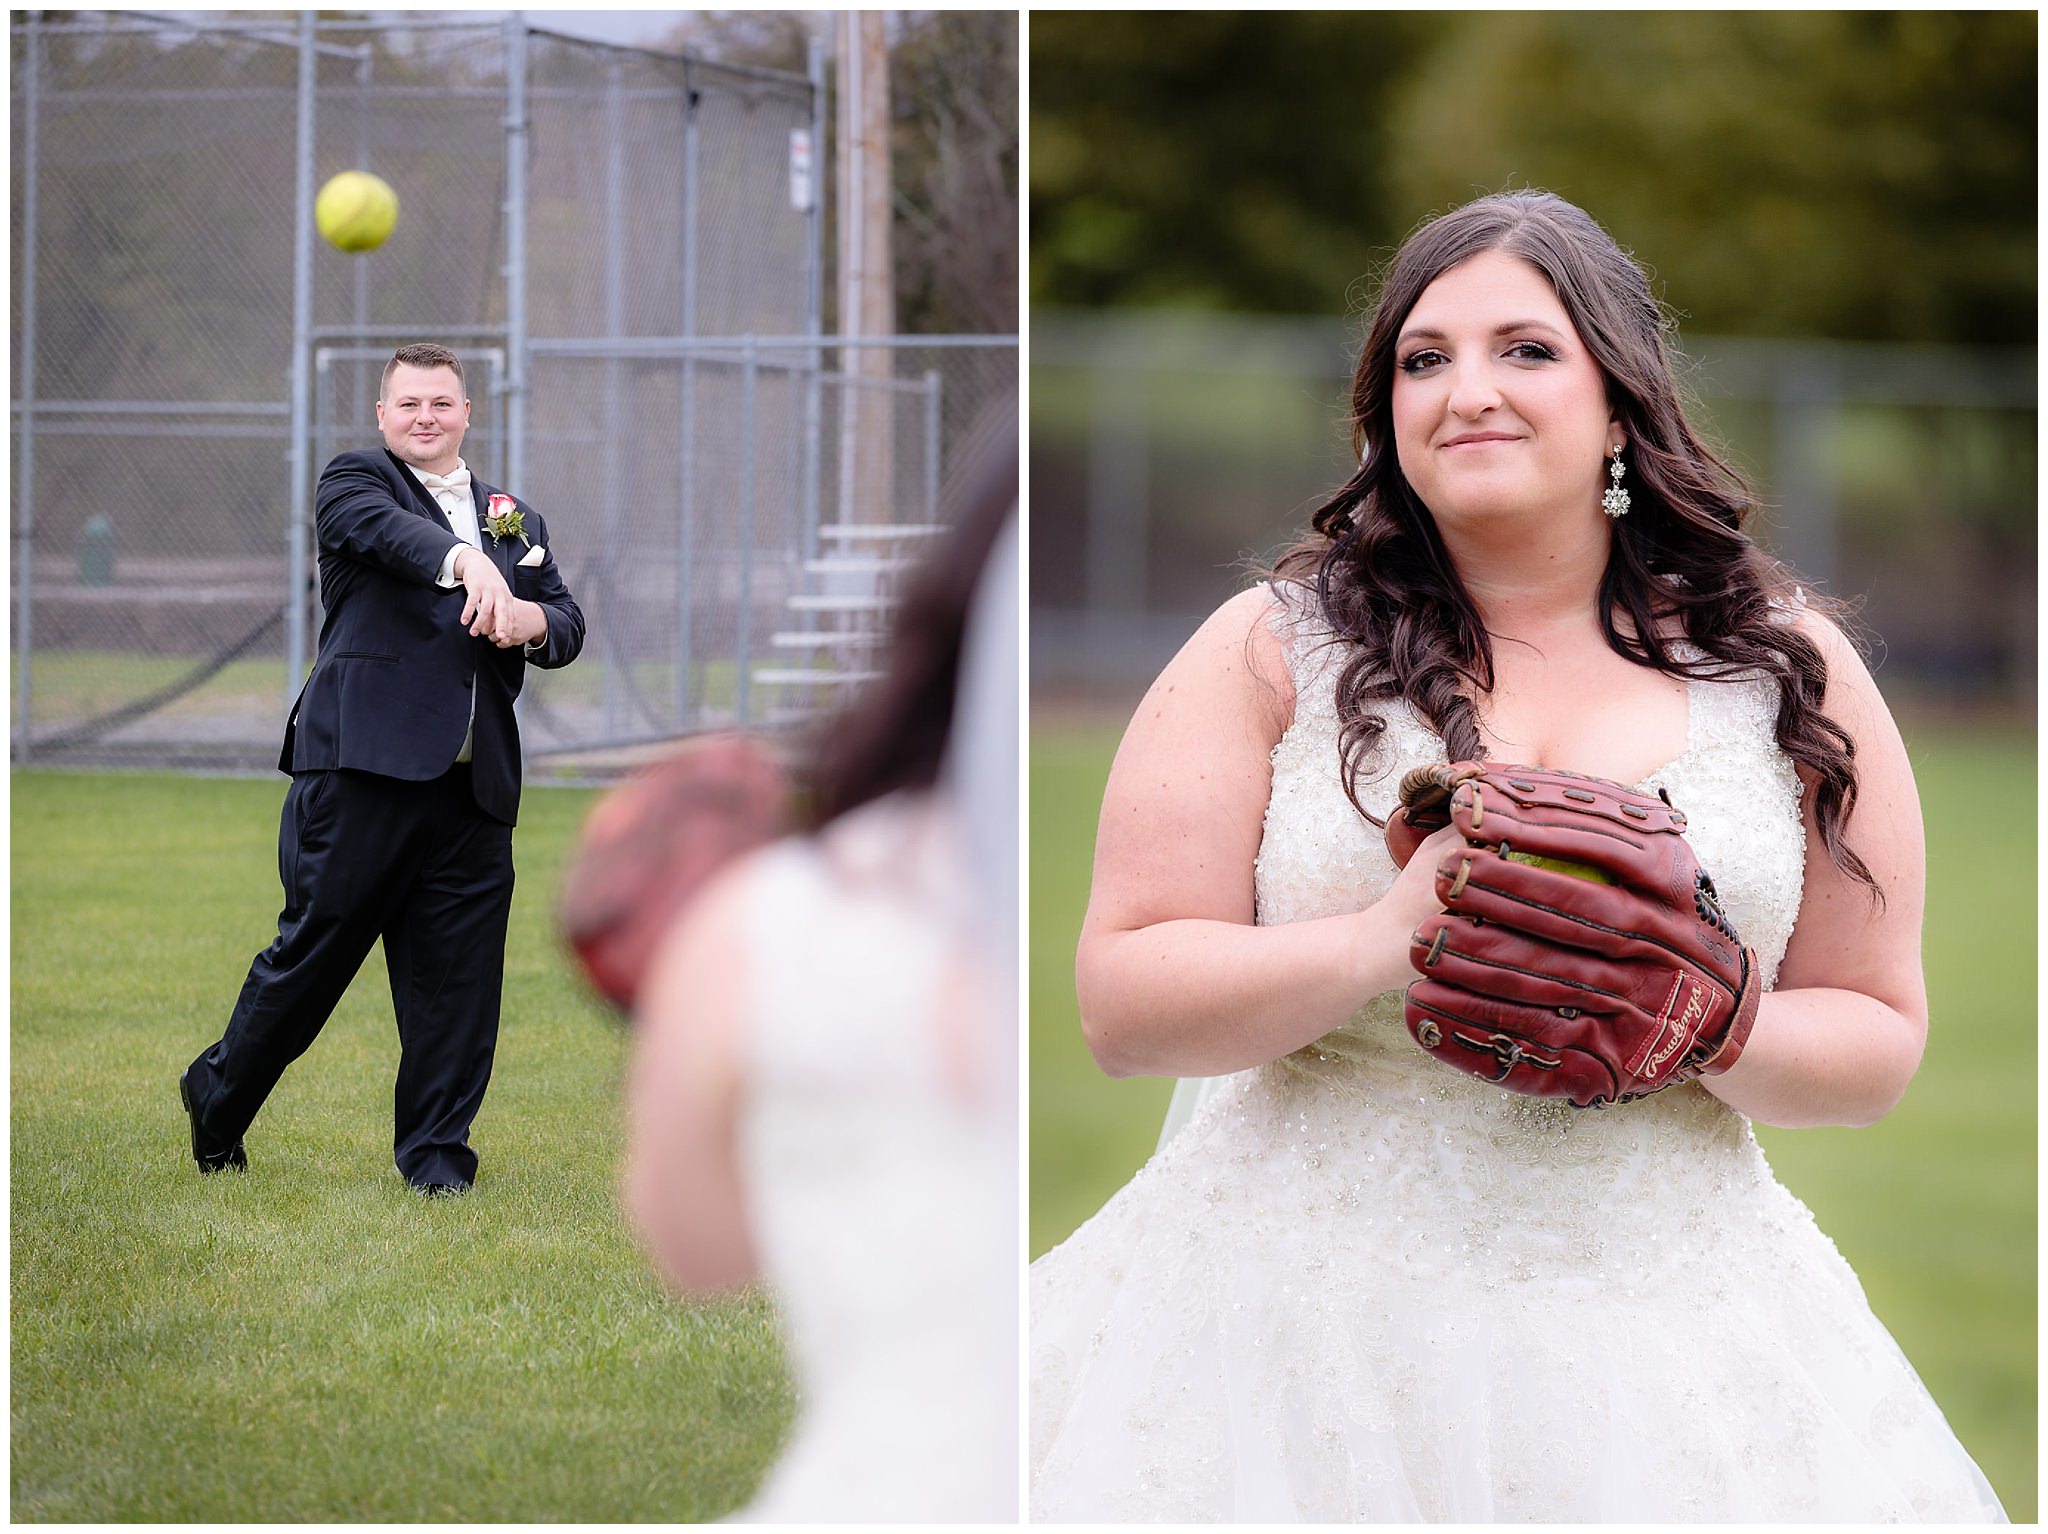 Bride and groom play catch with a softball during portraits at Robinson Township Girls Softball field